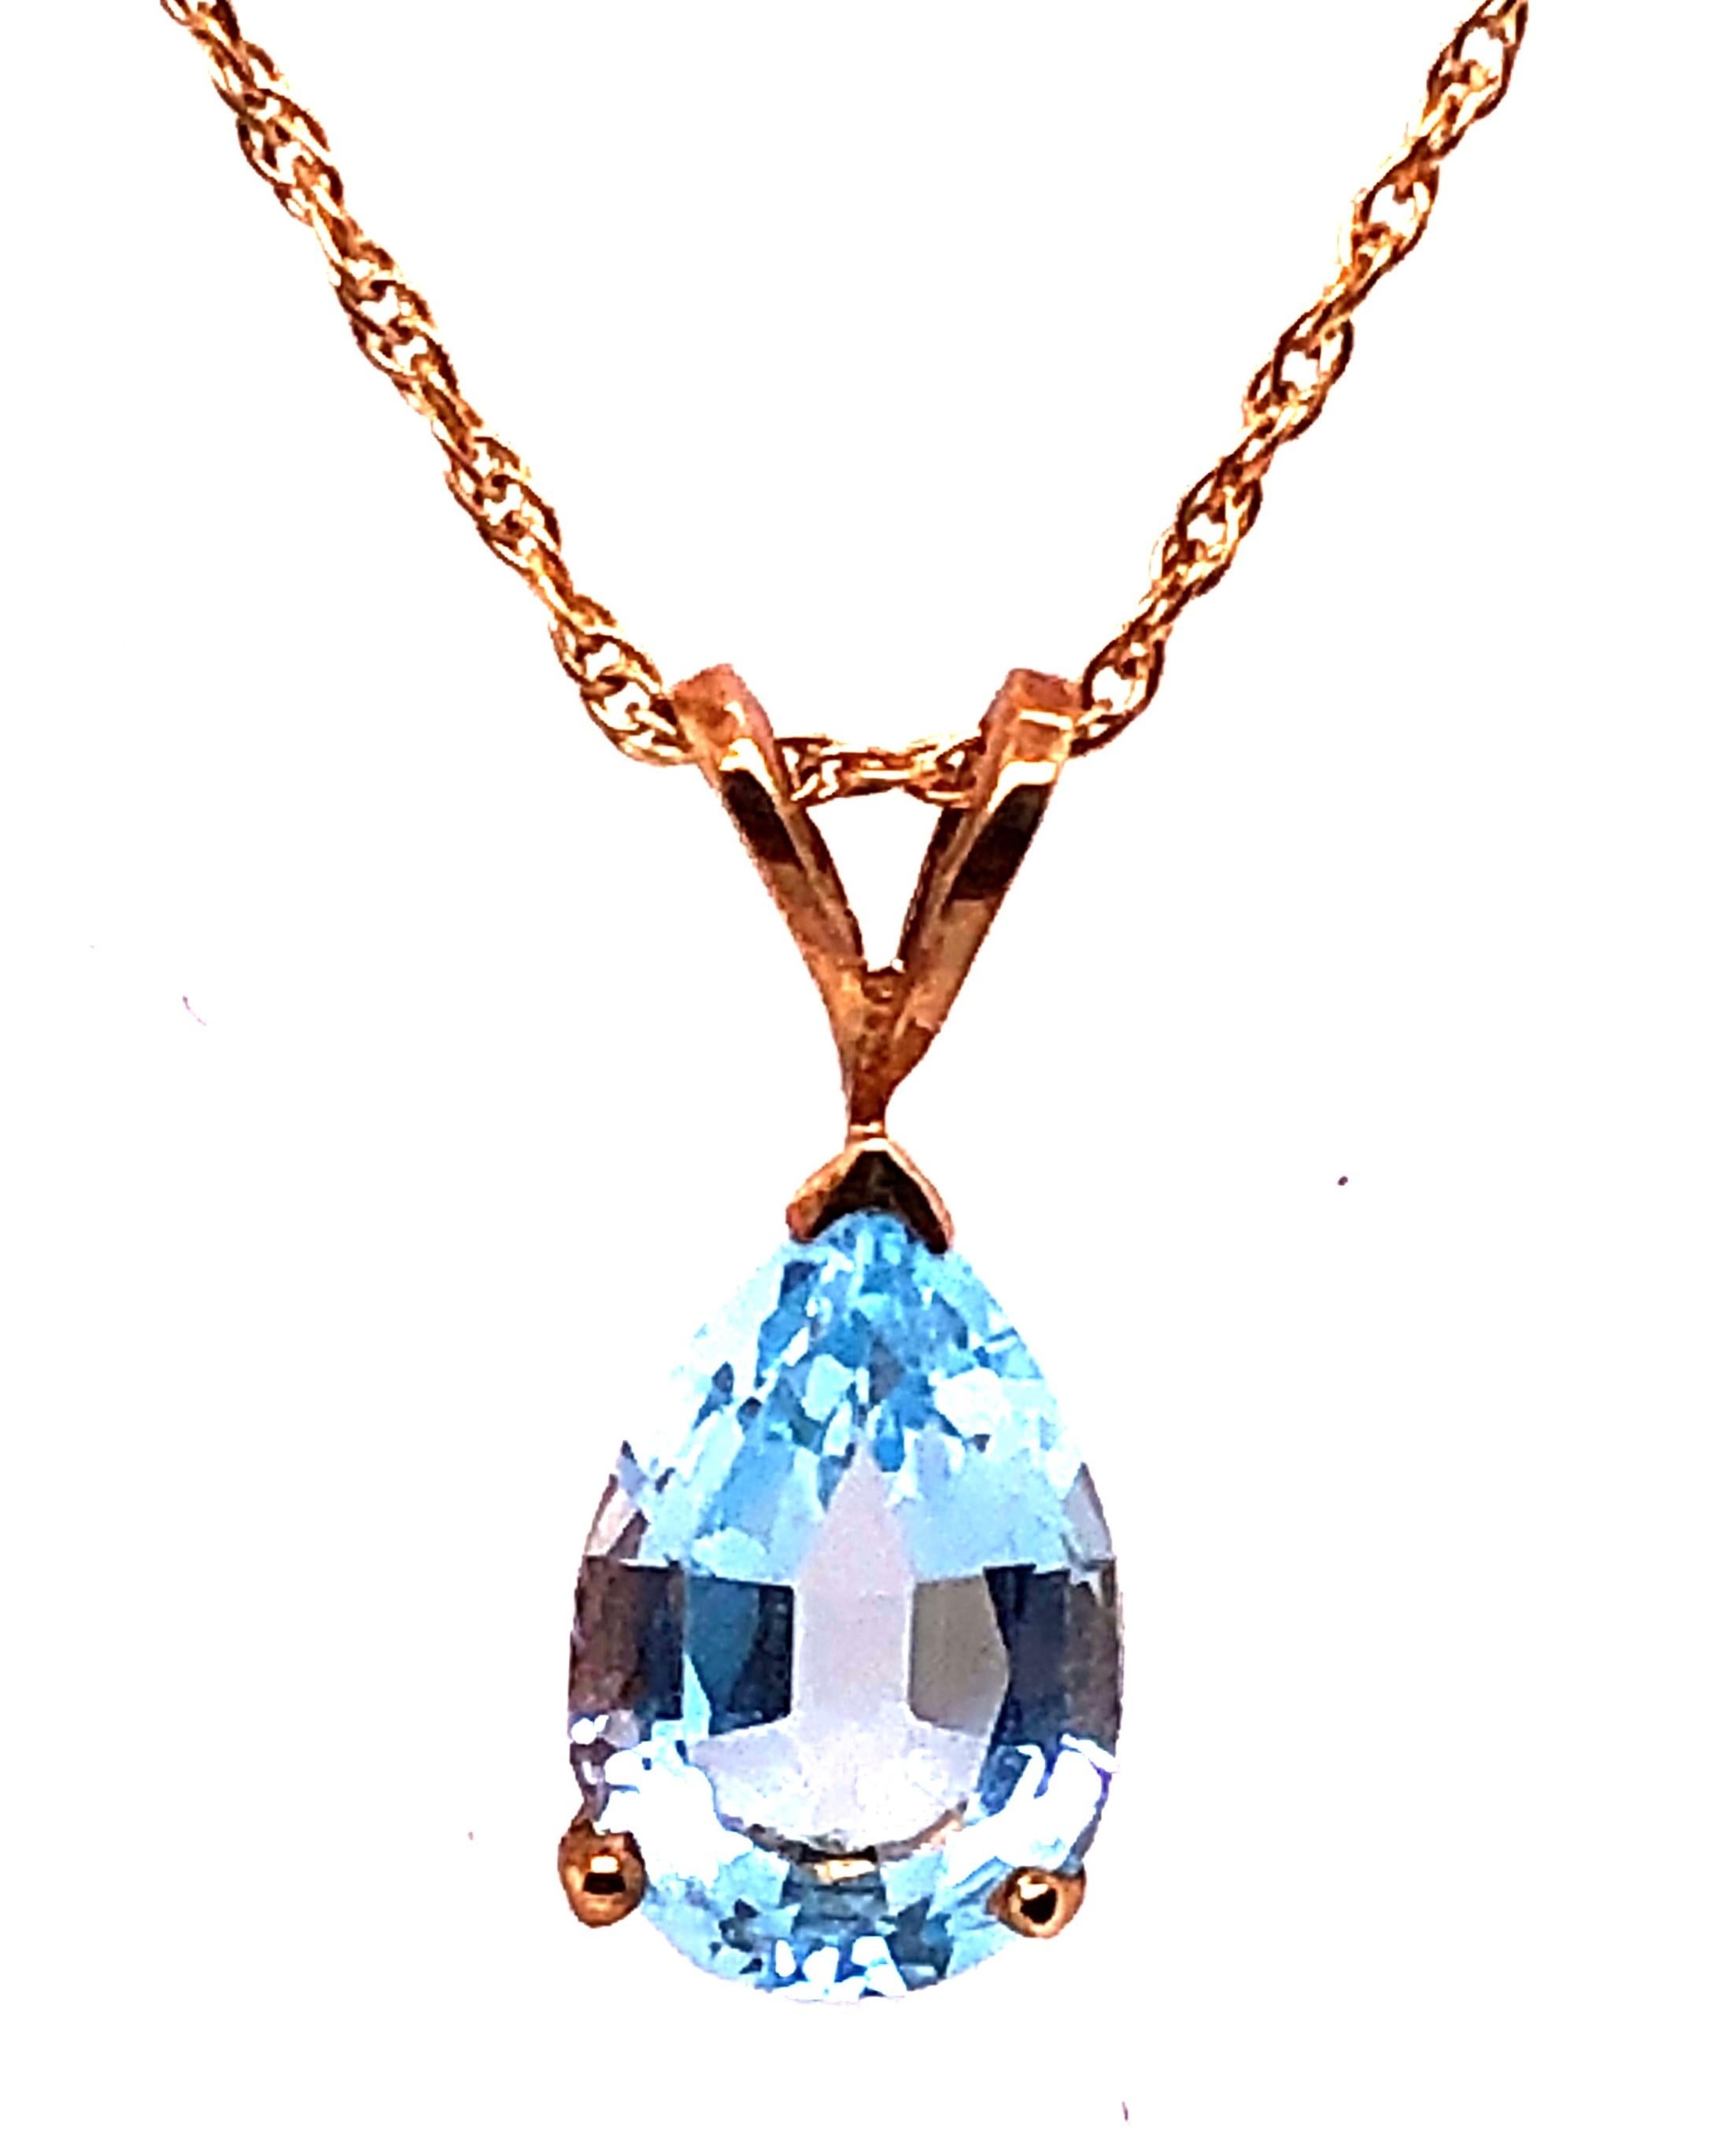 14 Karat Yellow Gold 16 Inch Free Form Necklace with One Pear Blue Topaz Pendant. Pendant is 11 by 6.63mm. 2.2 grams total weight. Stamped 14K